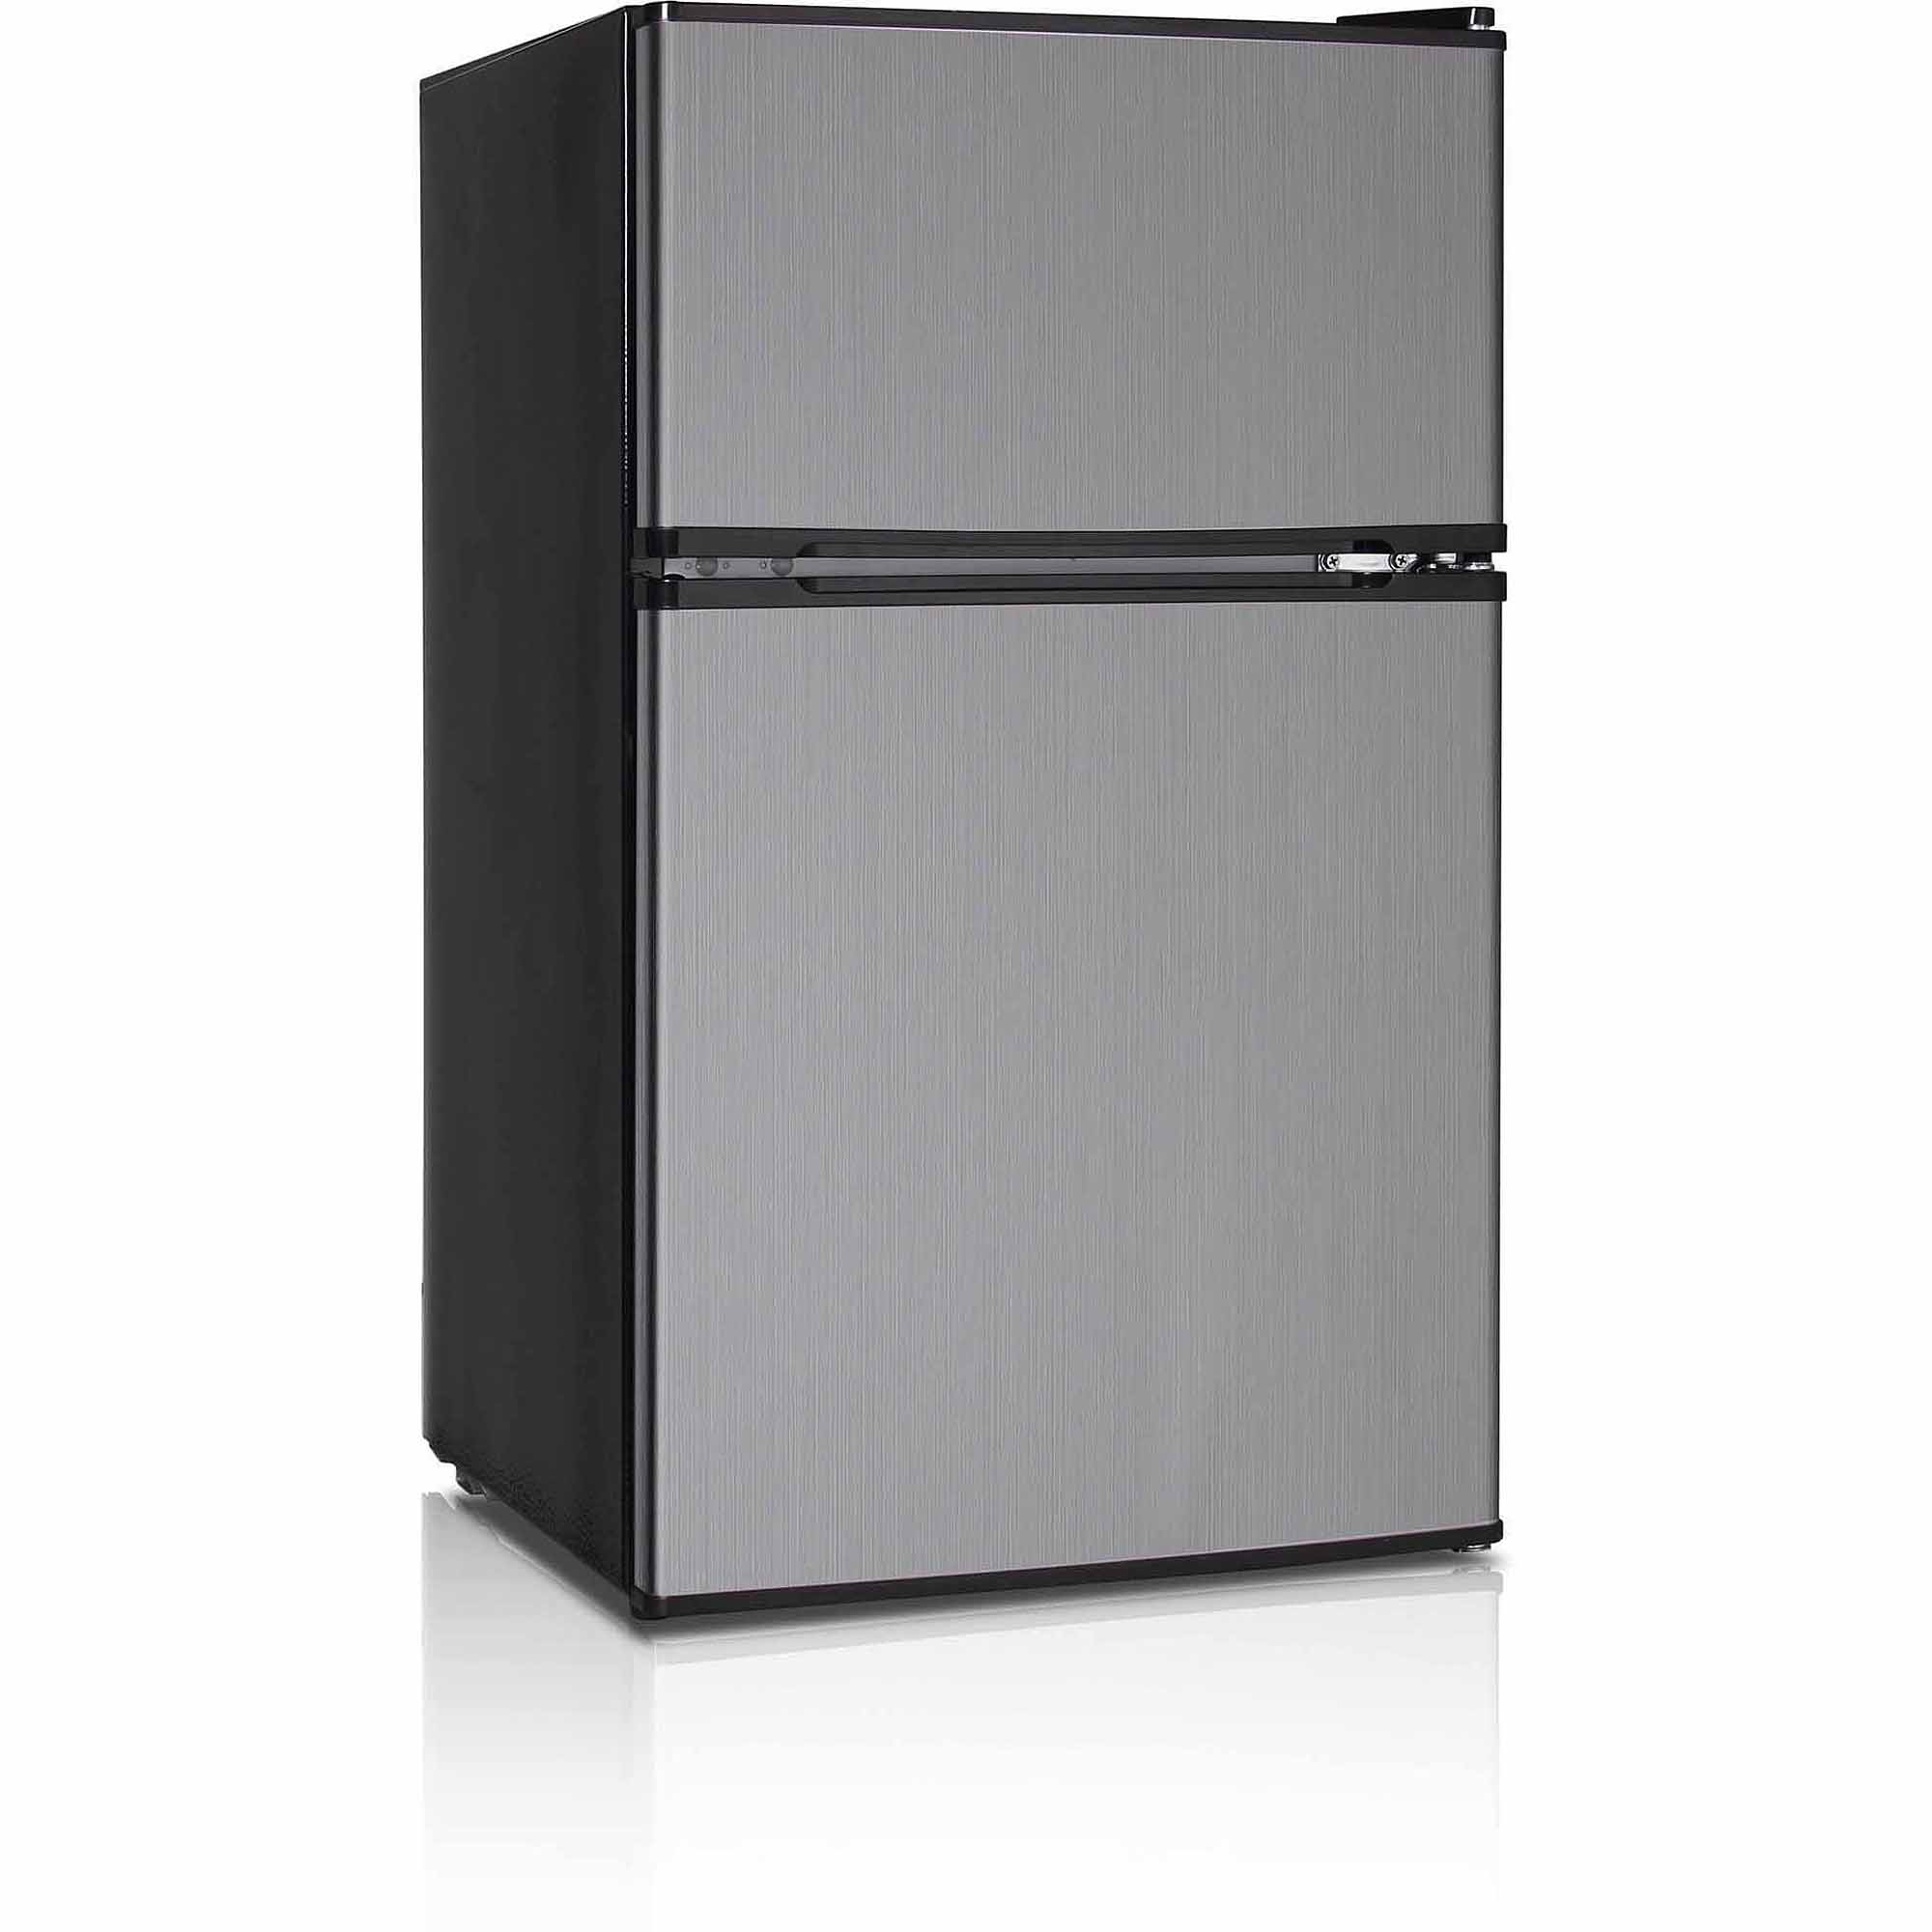 Midea 3.1 cubic foot Compact Refrigerator and Freezer - image 1 of 5